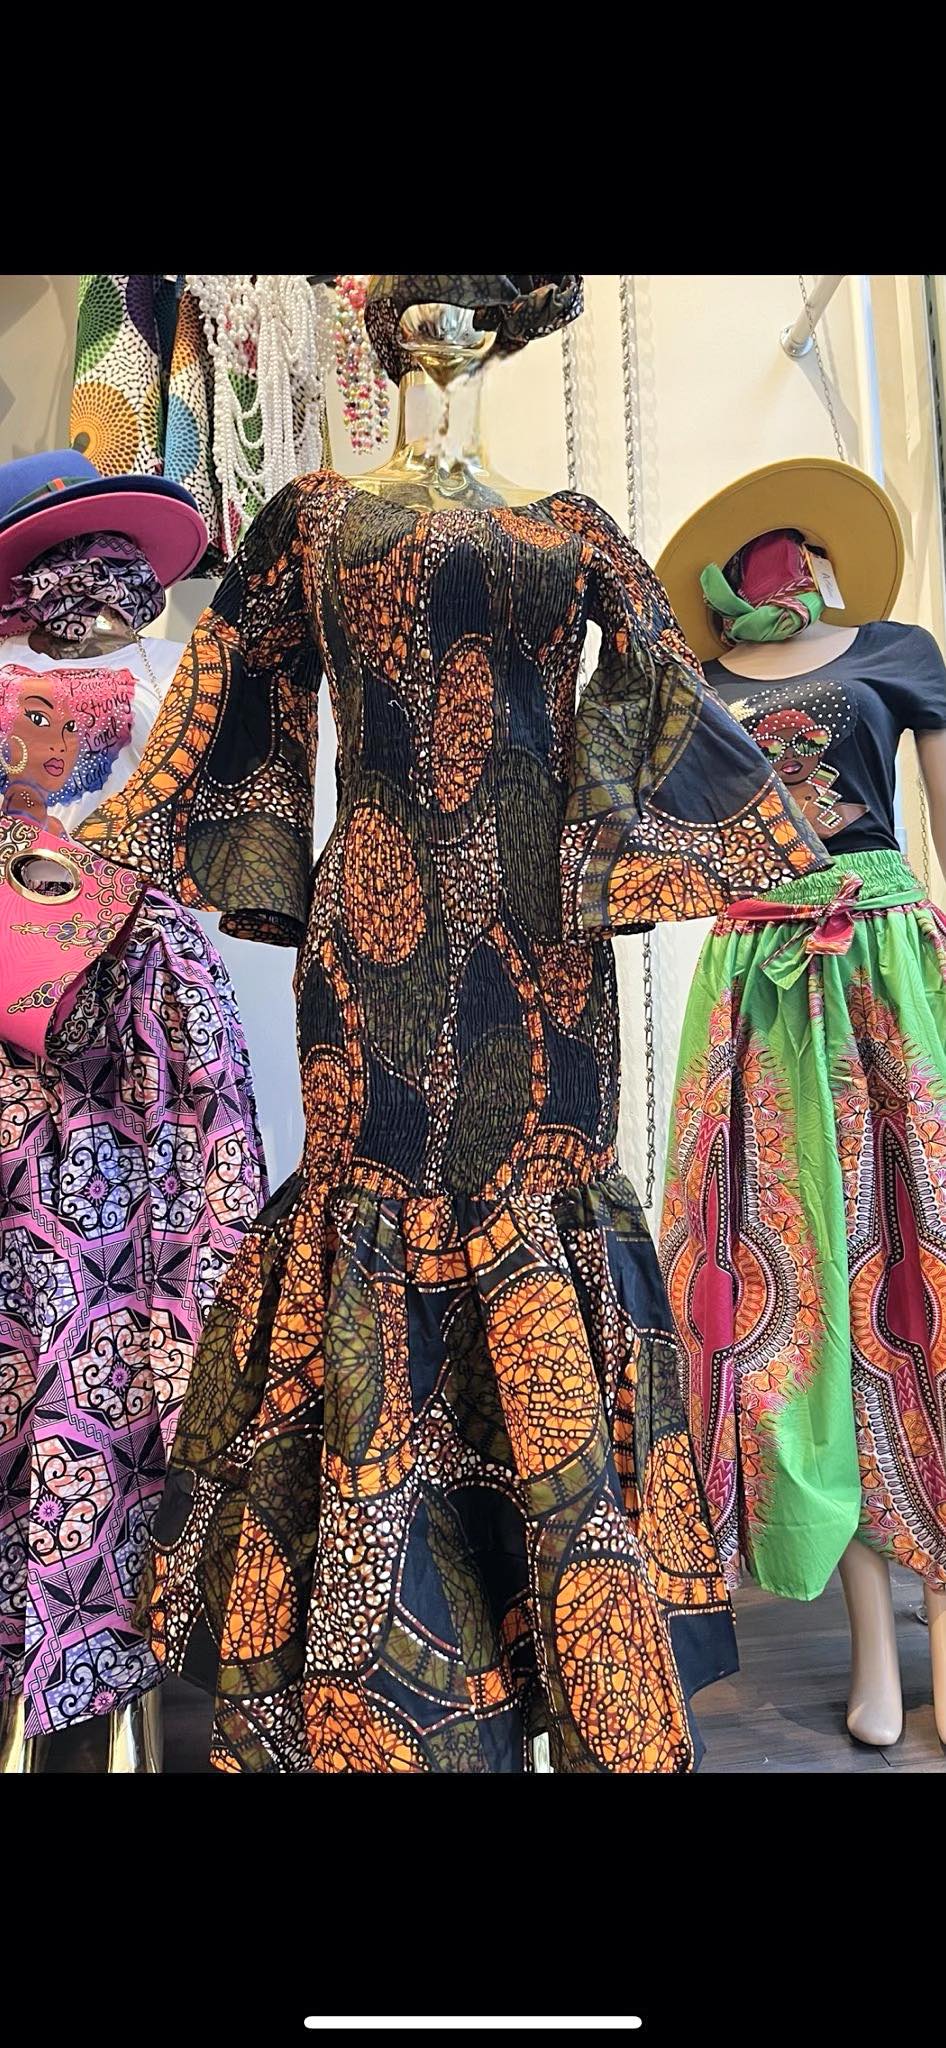 One Size Cultural Dress